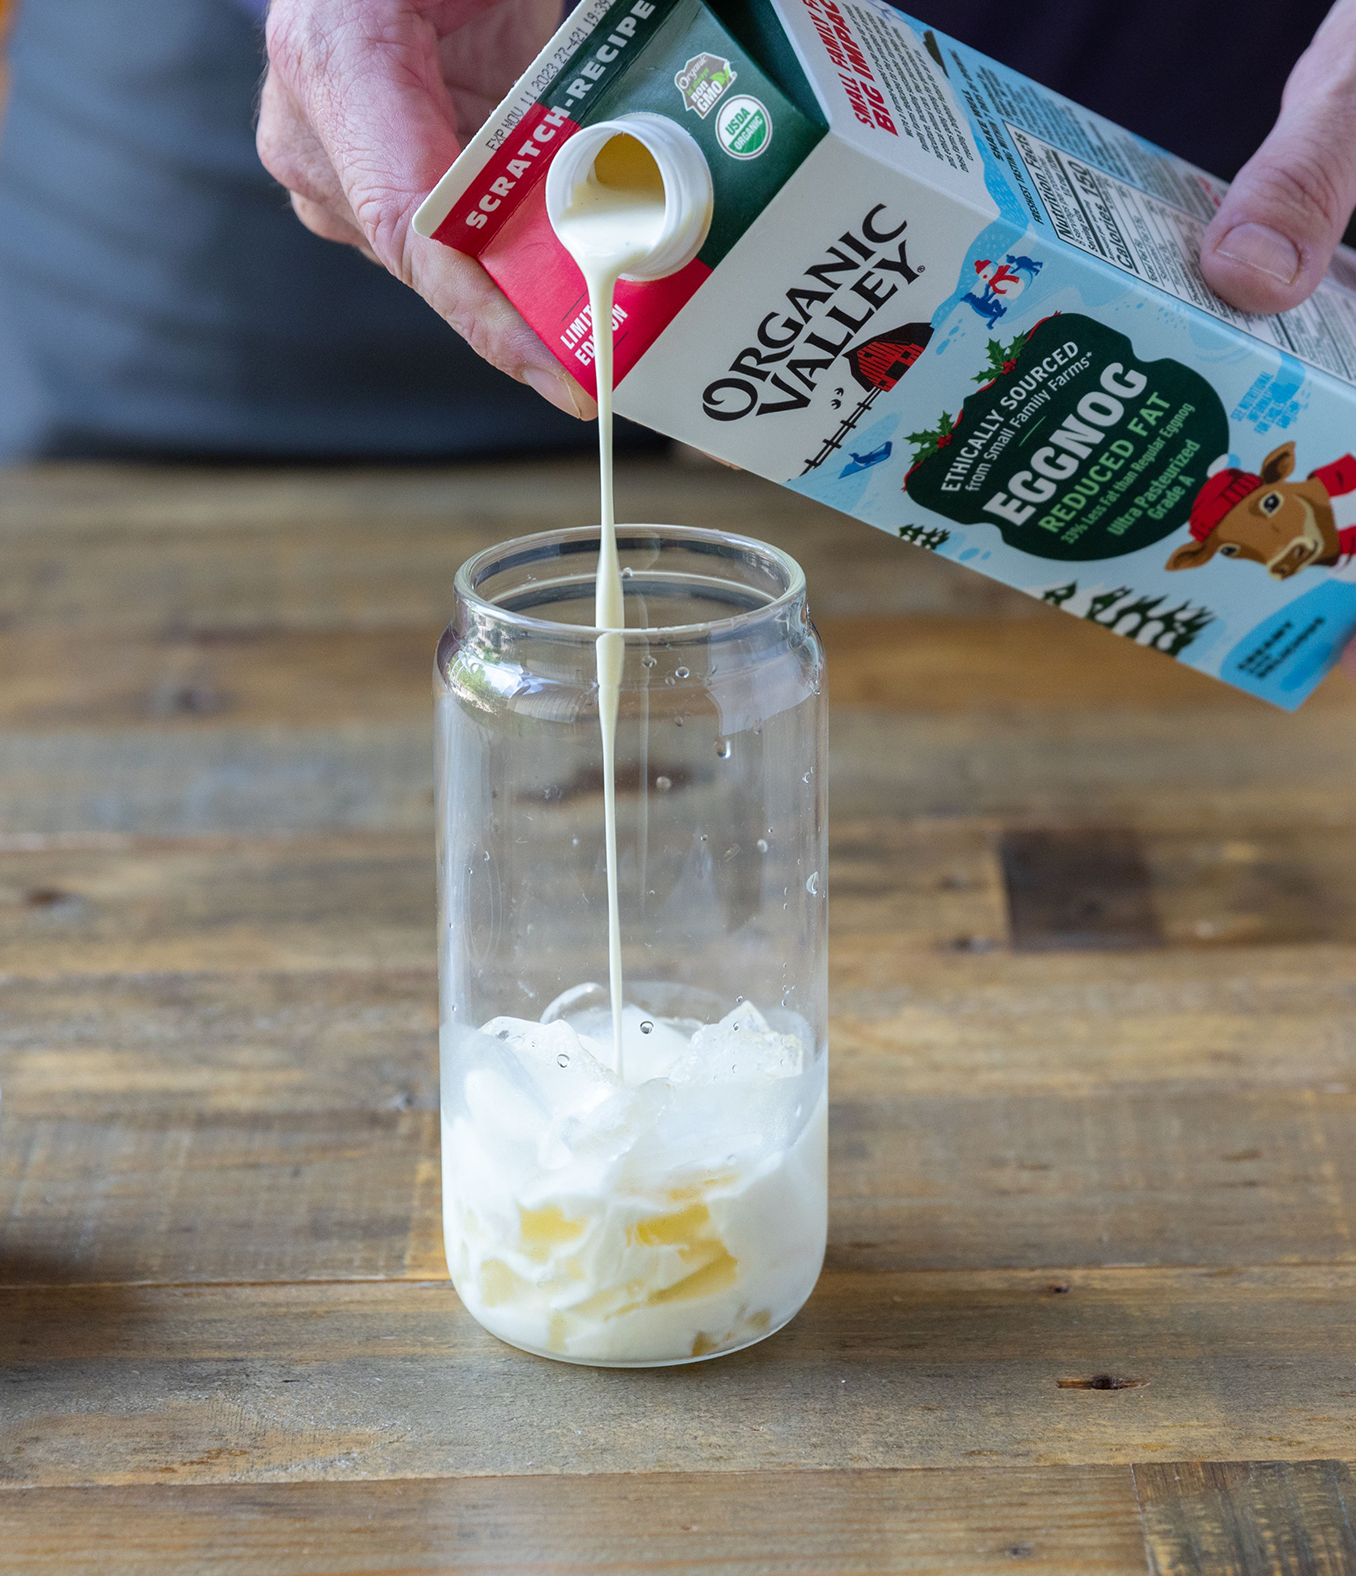 Organic Valley Eggnog being poured into a glass with ice. 